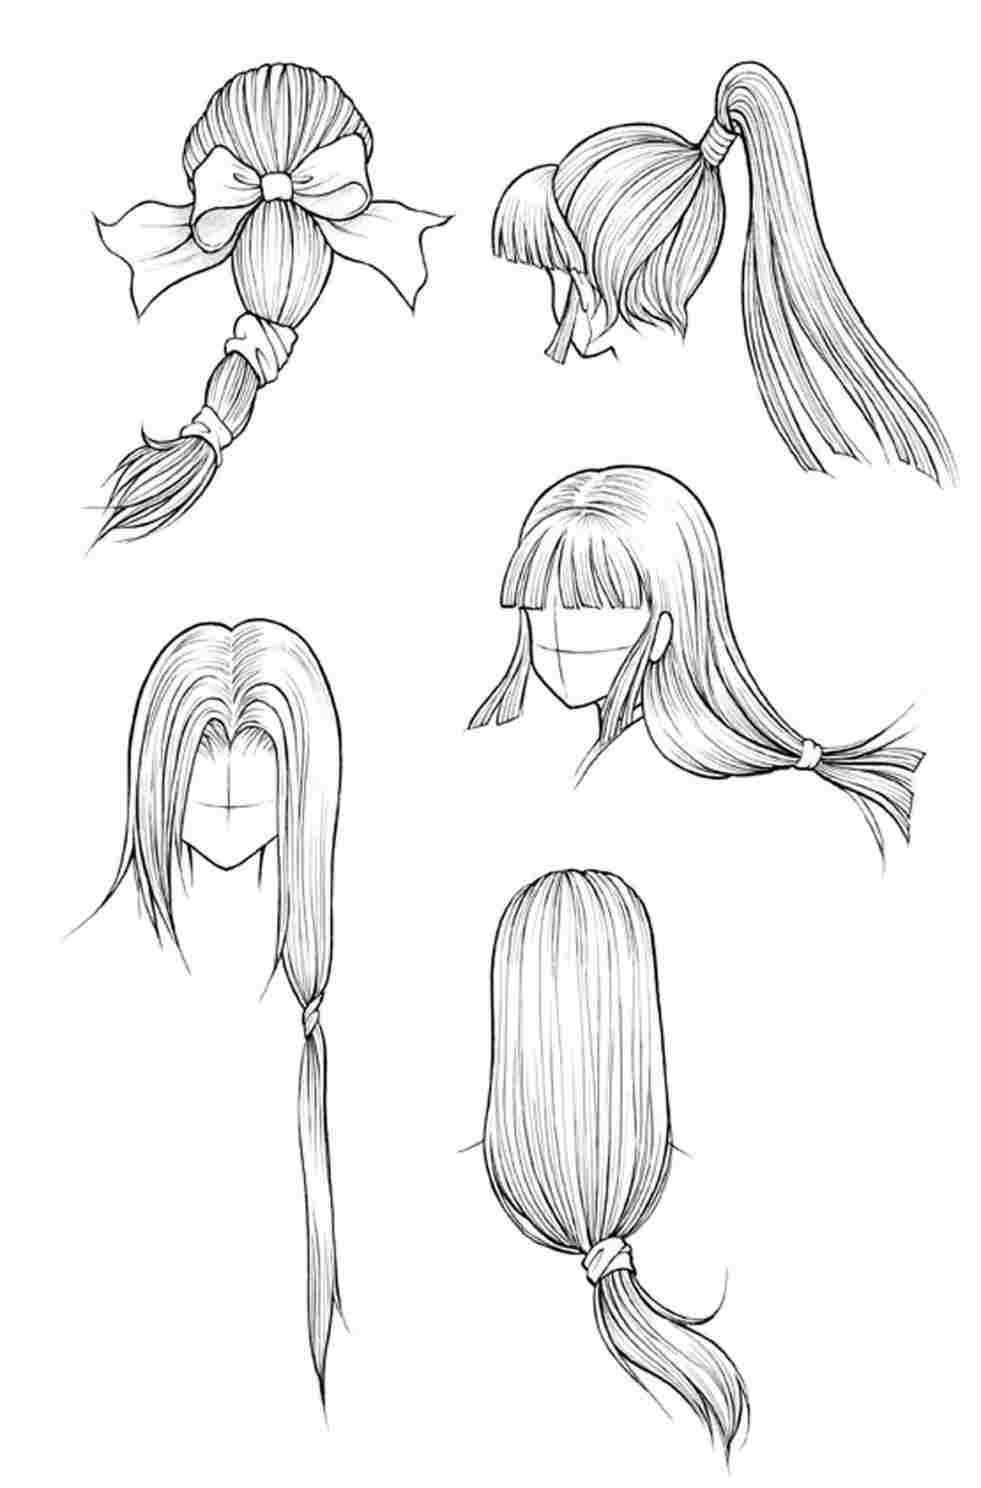 Pin Anime Ponytail Hairstyles Drawing By Rugrat Kid On Hairstyles - Male hairstyles drawing - abbey Blog -   9 hairstyles Drawing easy ideas